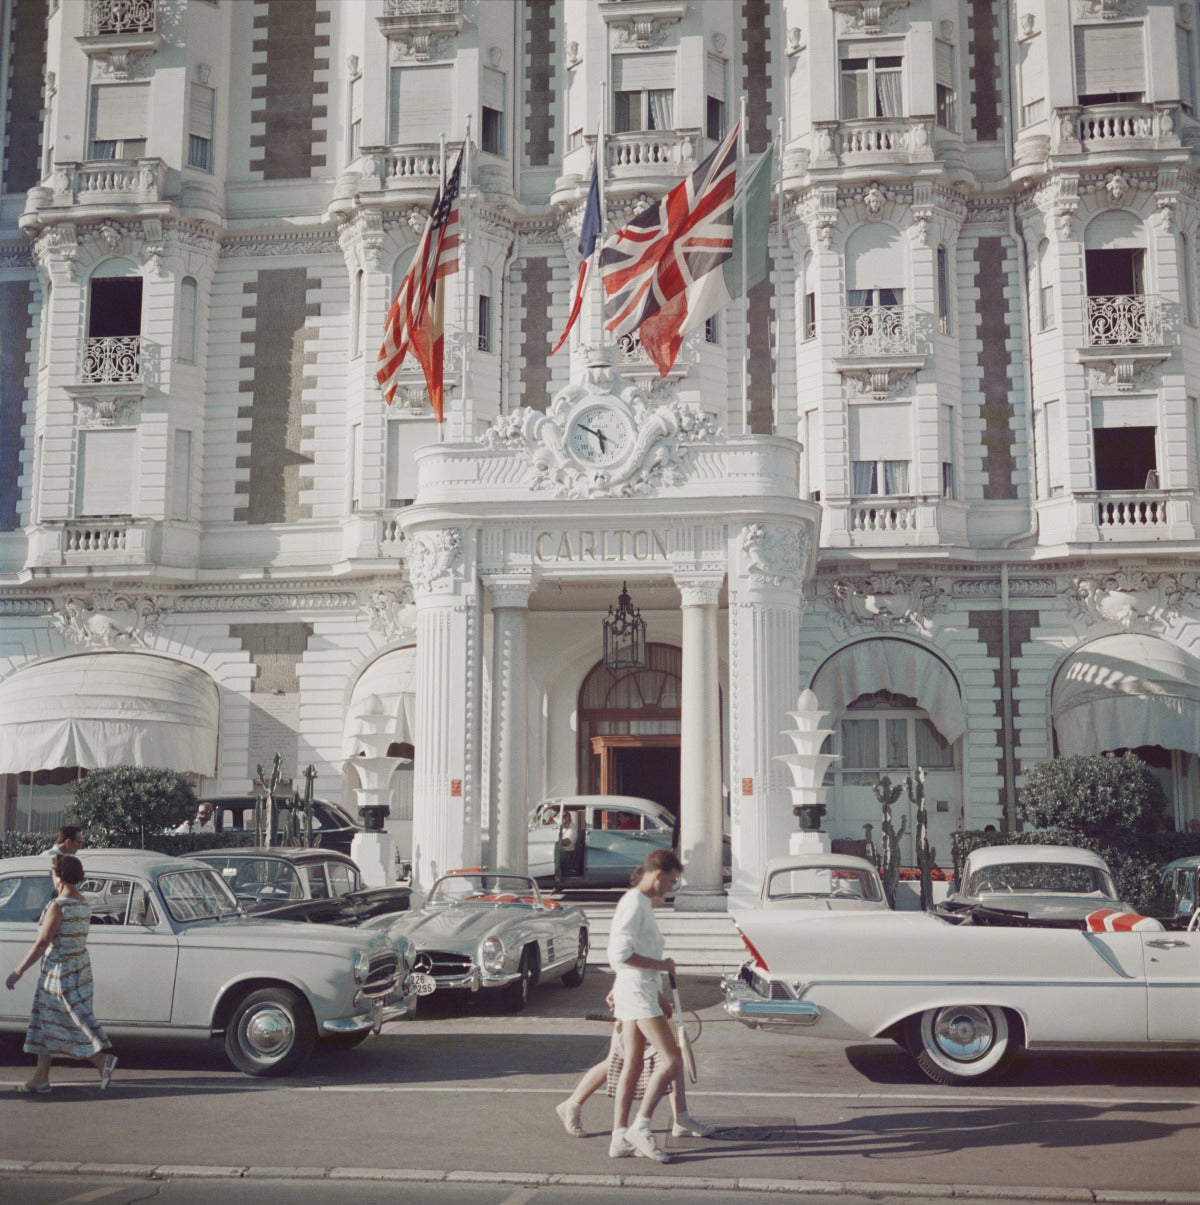 The entrance to the Carlton Hotel, Cannes, France, 1958. 

Estate stamped and hand numbered edition of 150 with certificate of authenticity from the estate. 

Slim Aarons (1916-2006) worked mainly for society publications photographing "attractive